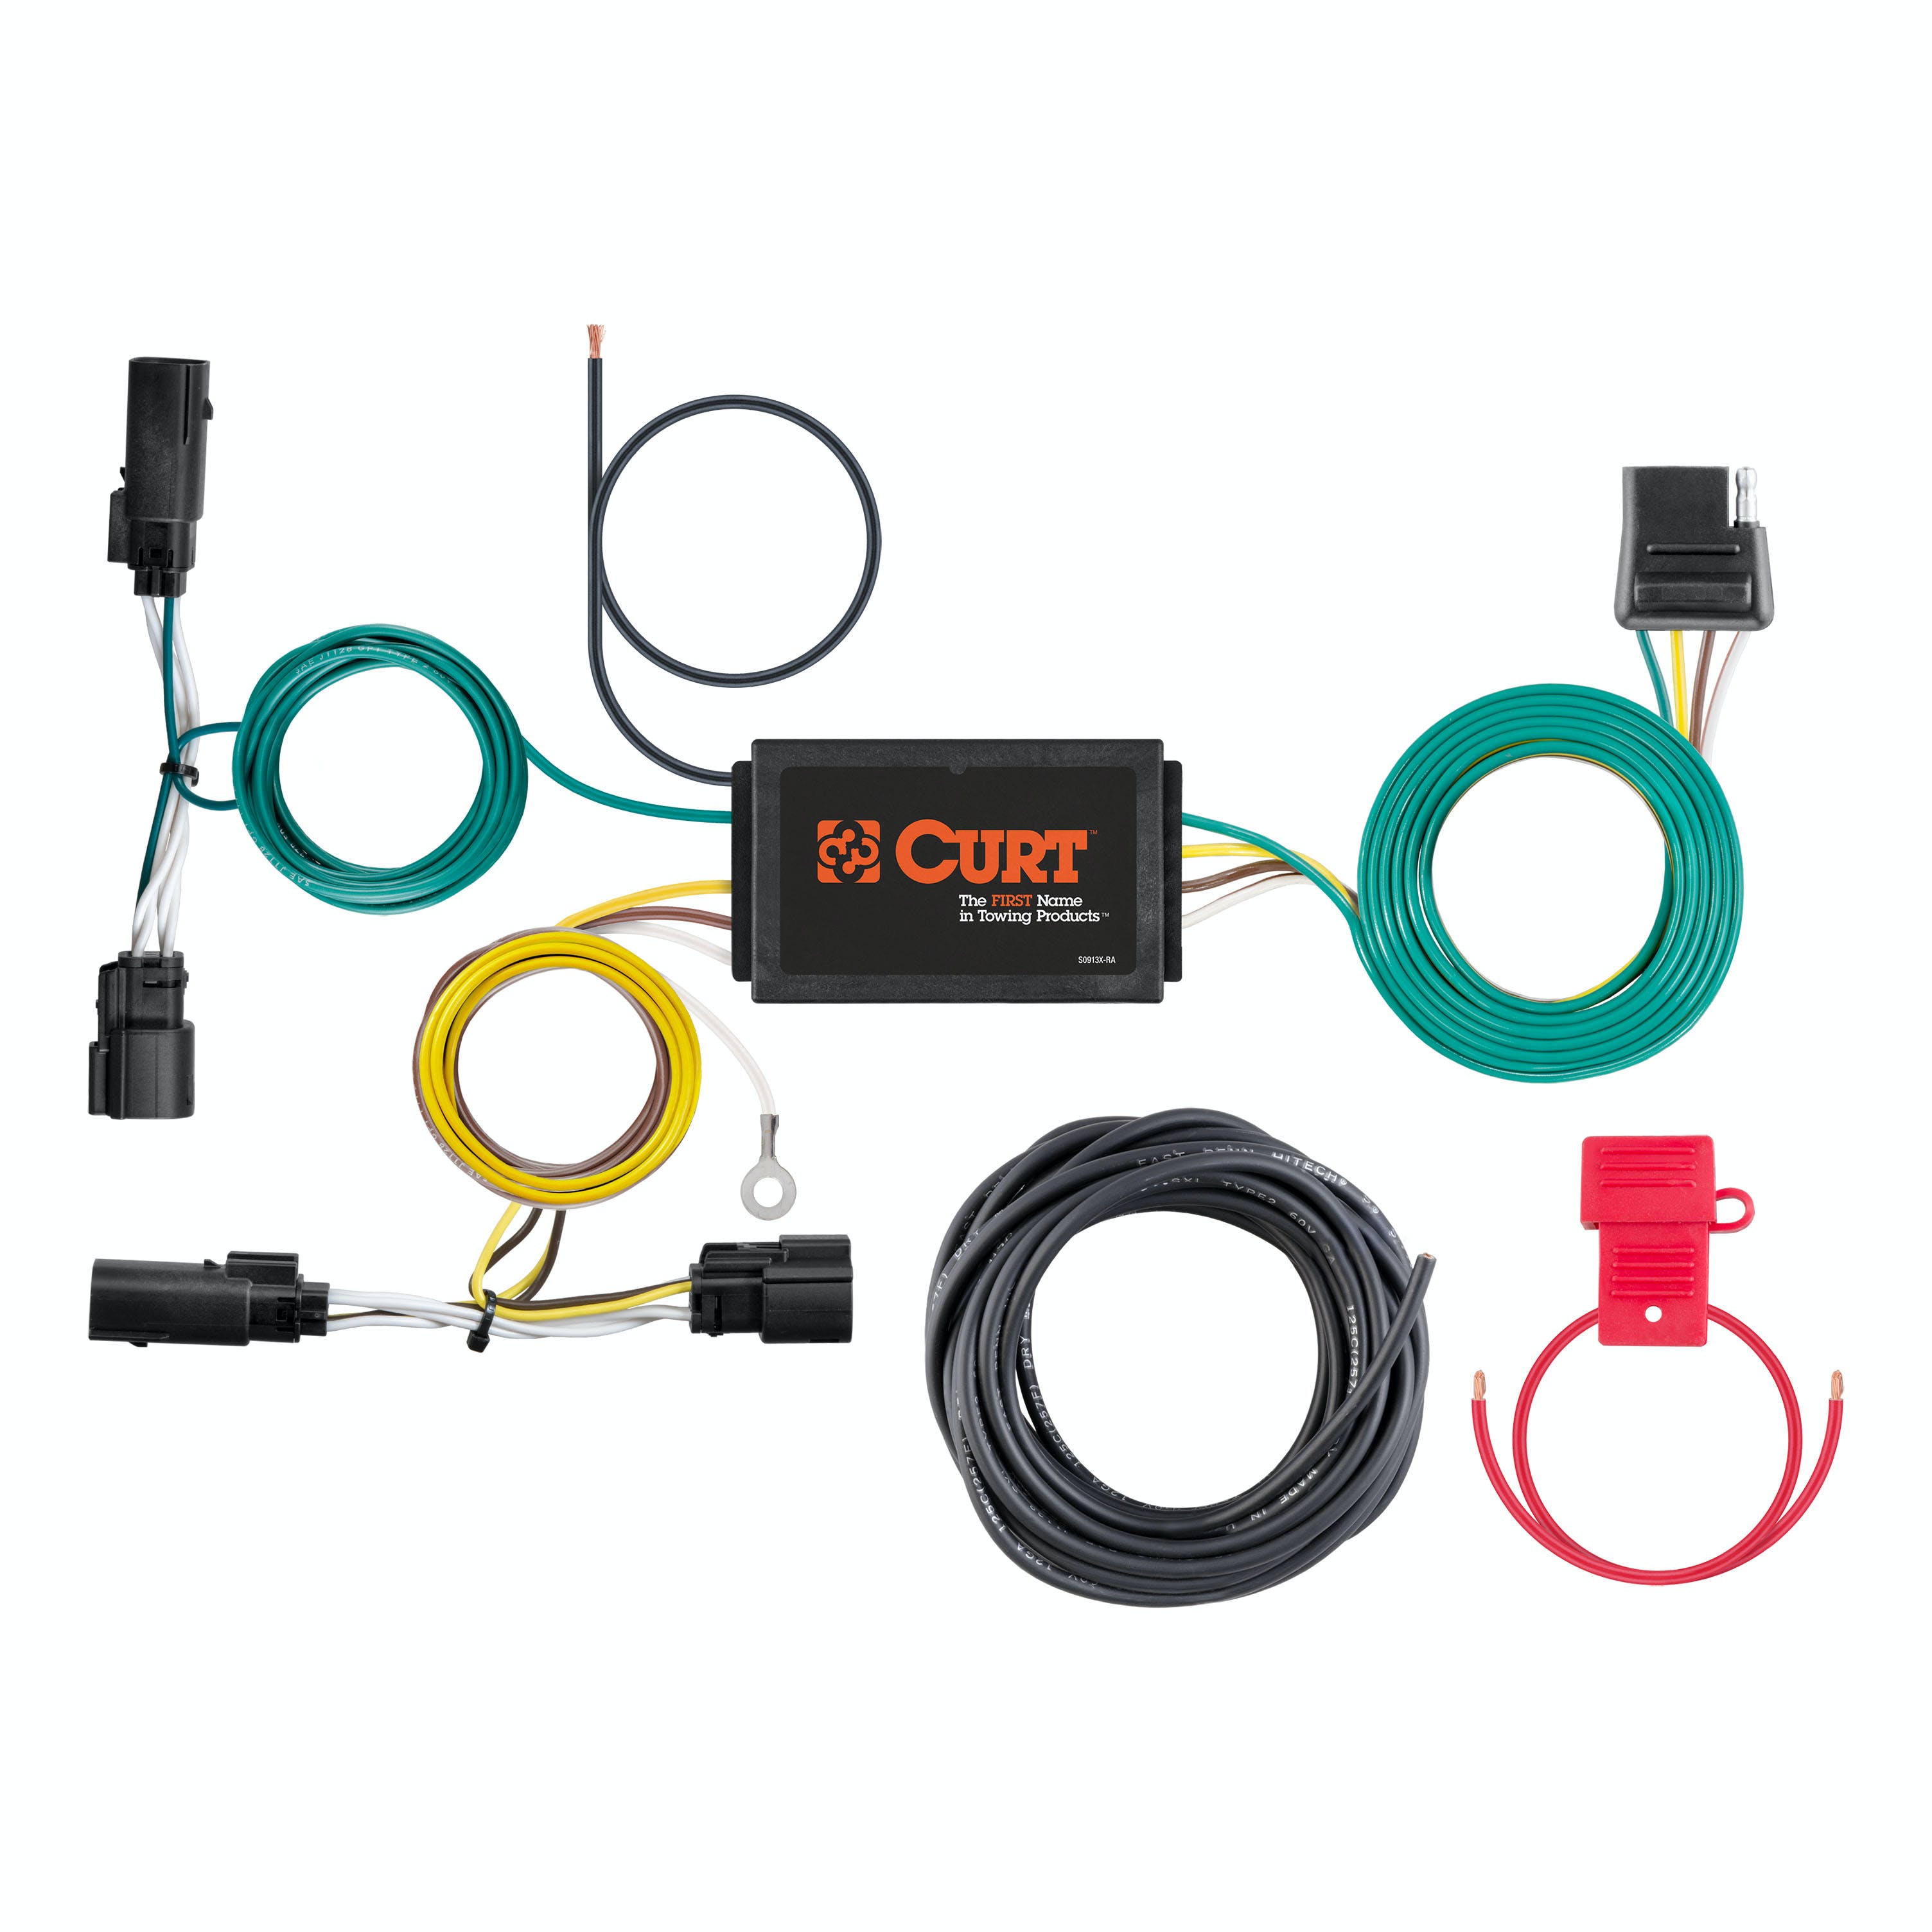 CURT 56432 Custom Wiring Harness, 4-Way Flat Output, Select Ford Escape